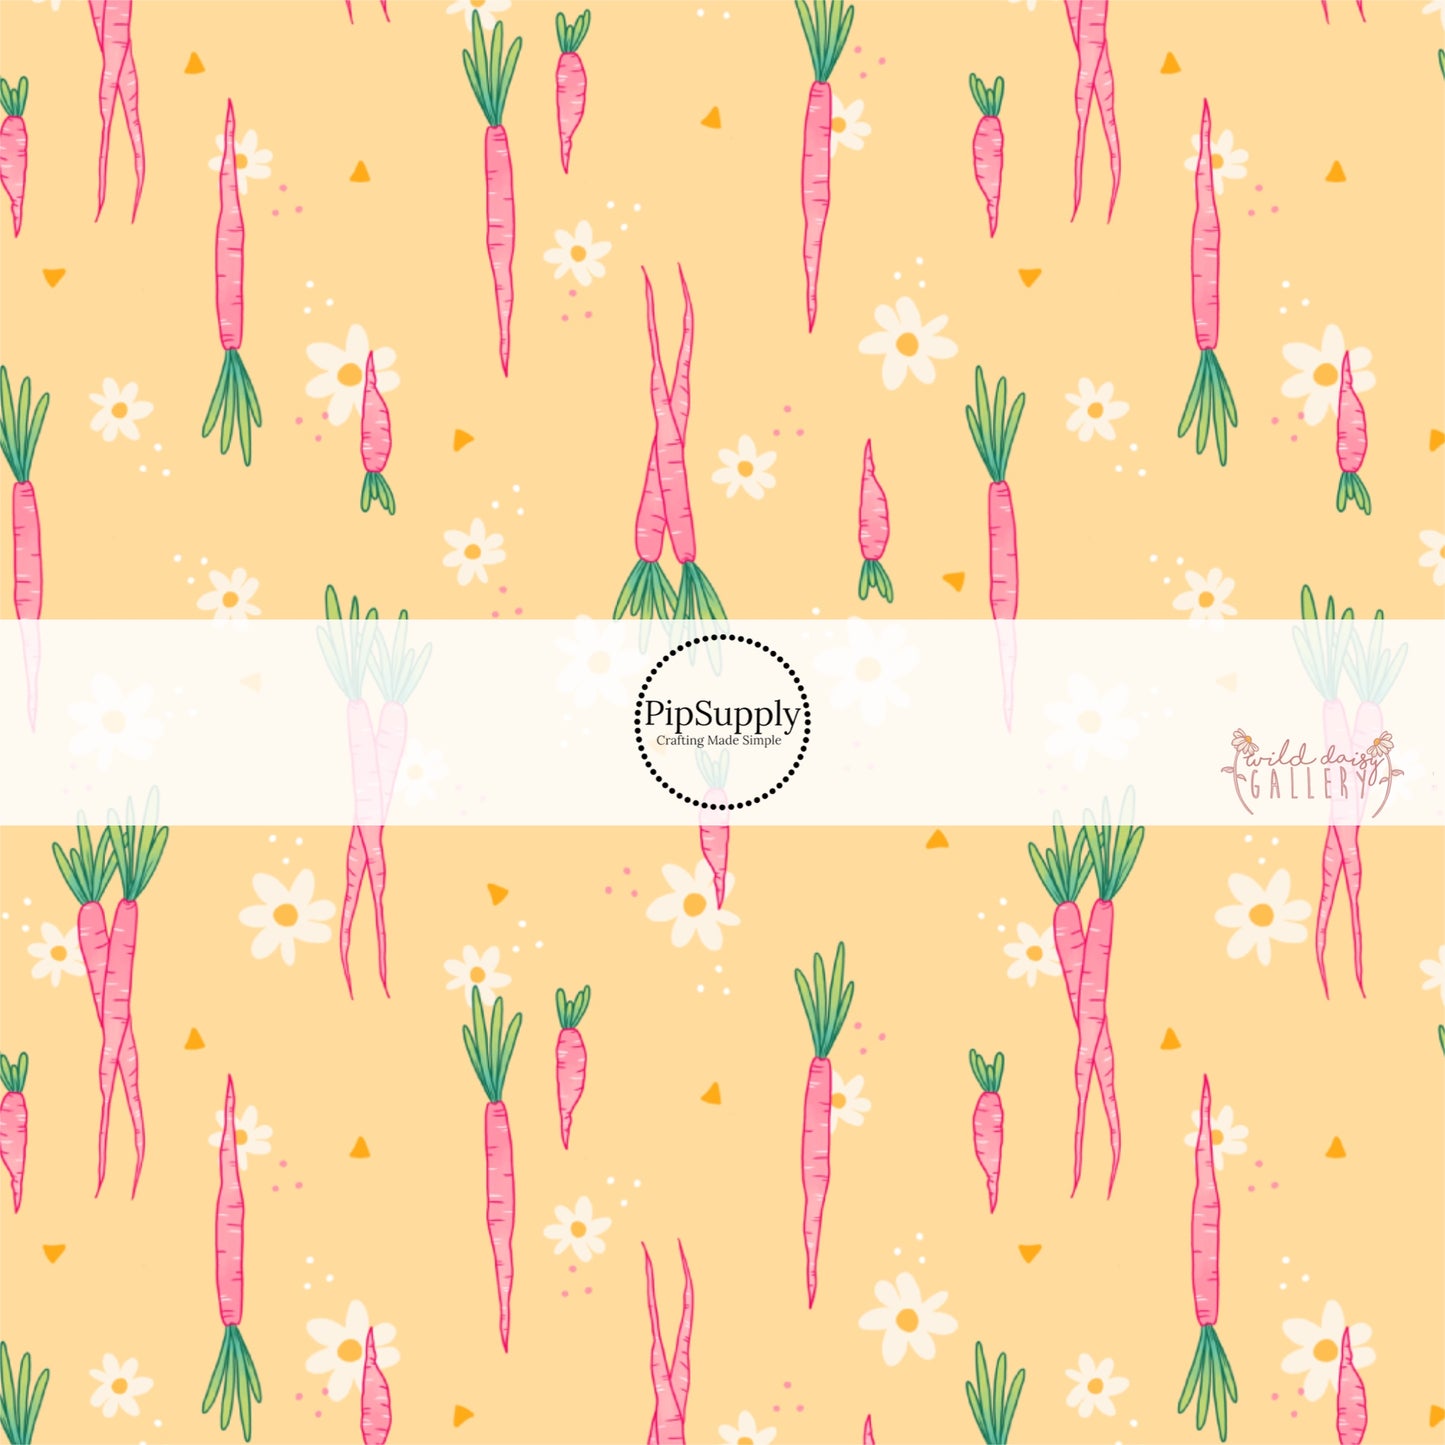 Pale yellow fabric by the yard with pink carrots and white daisies